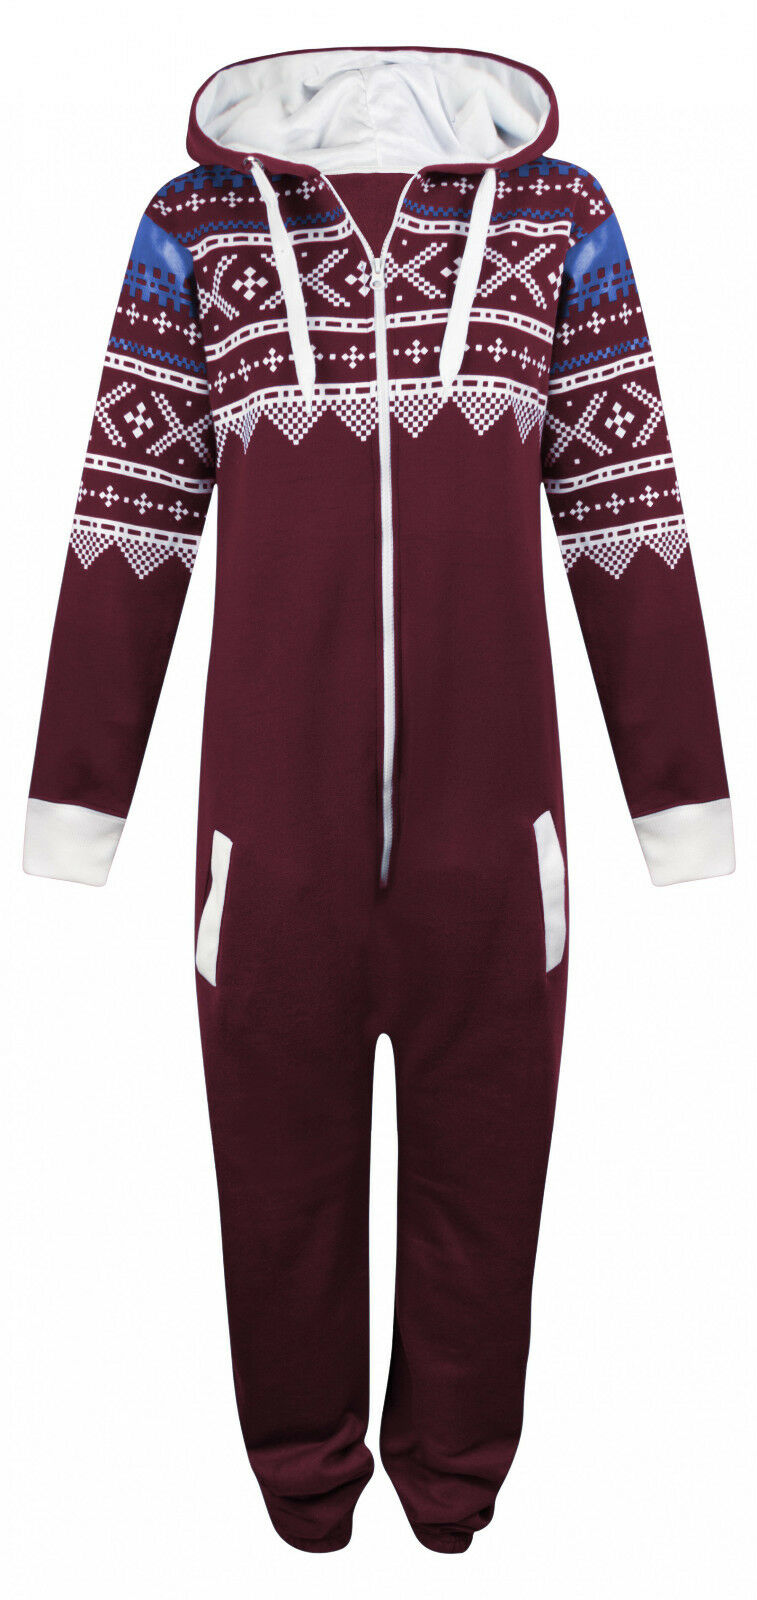 Adult Wine  Aztec Design Onesie. Cotton Lined Hood With Fleece Lining In The Rest Of The Onesie. The Cuffs and Ankles Are Ribbed Elastic. These Are To Be Worn Loosely. Sizes Small To X- Large.